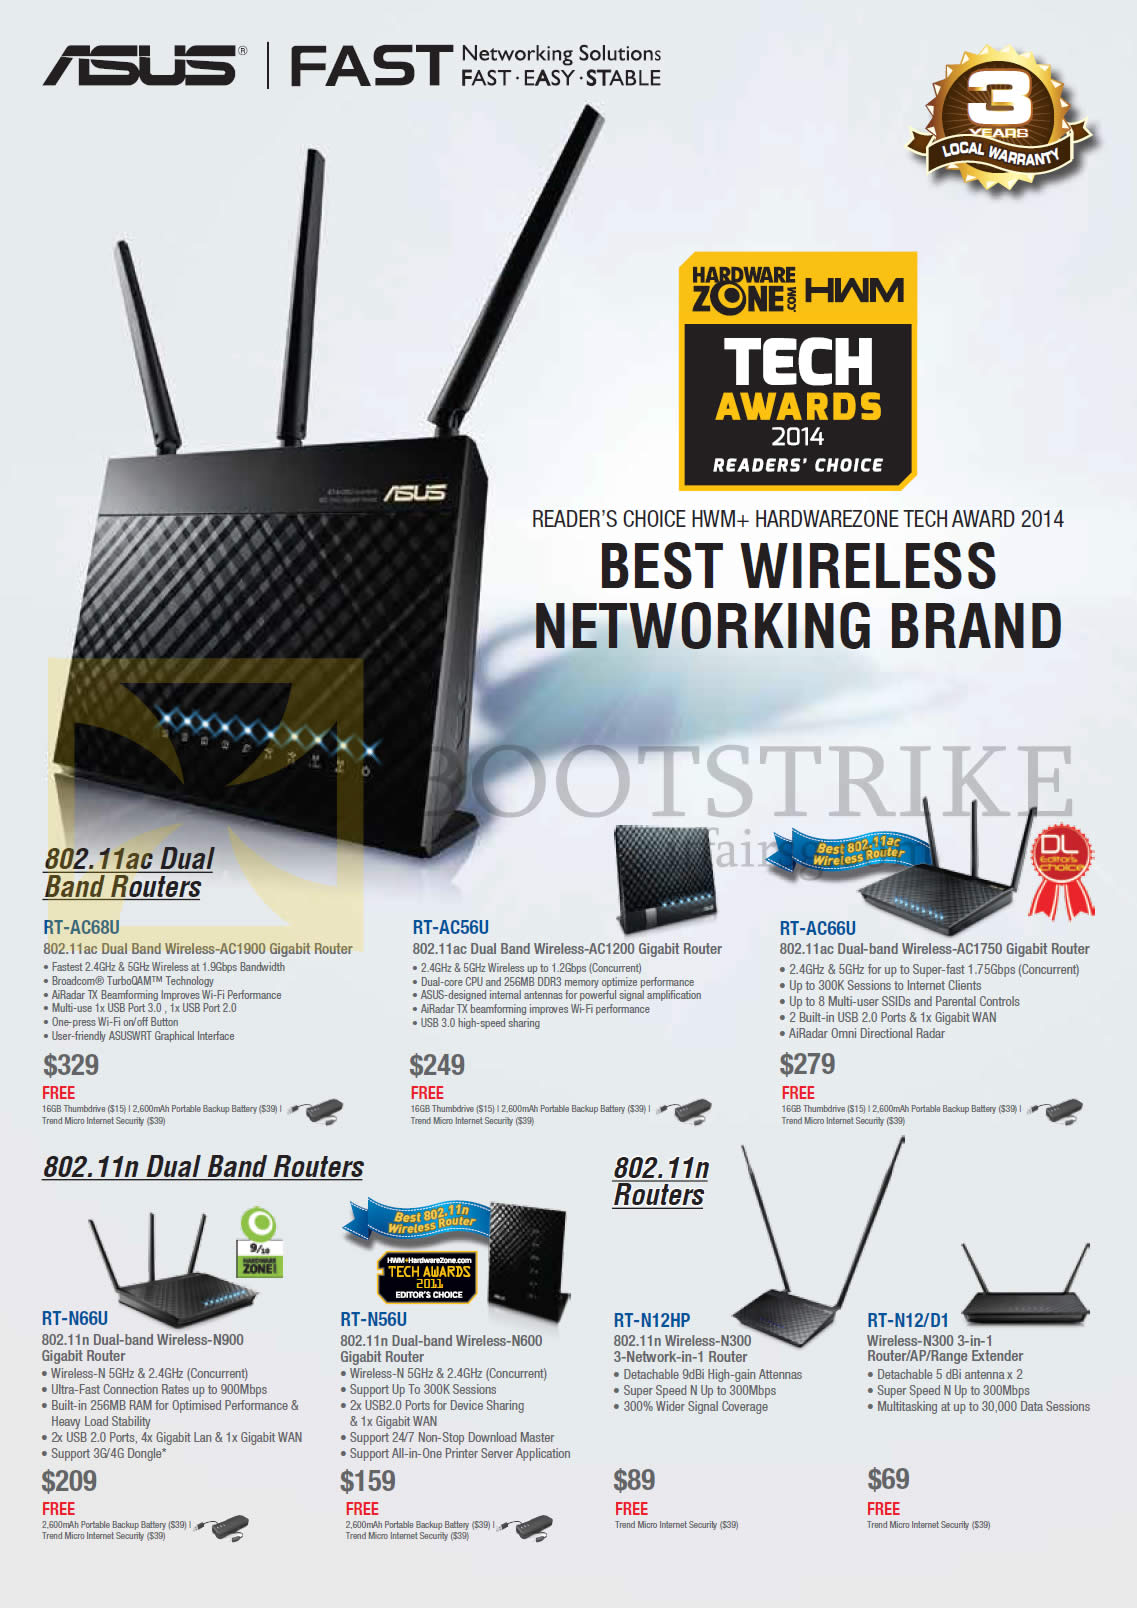 PC SHOW 2014 price list image brochure of ASUS Networking Routers, RT-AC68U, AC56U, AC66U, N66U, N56U, N12HP, N12-D1